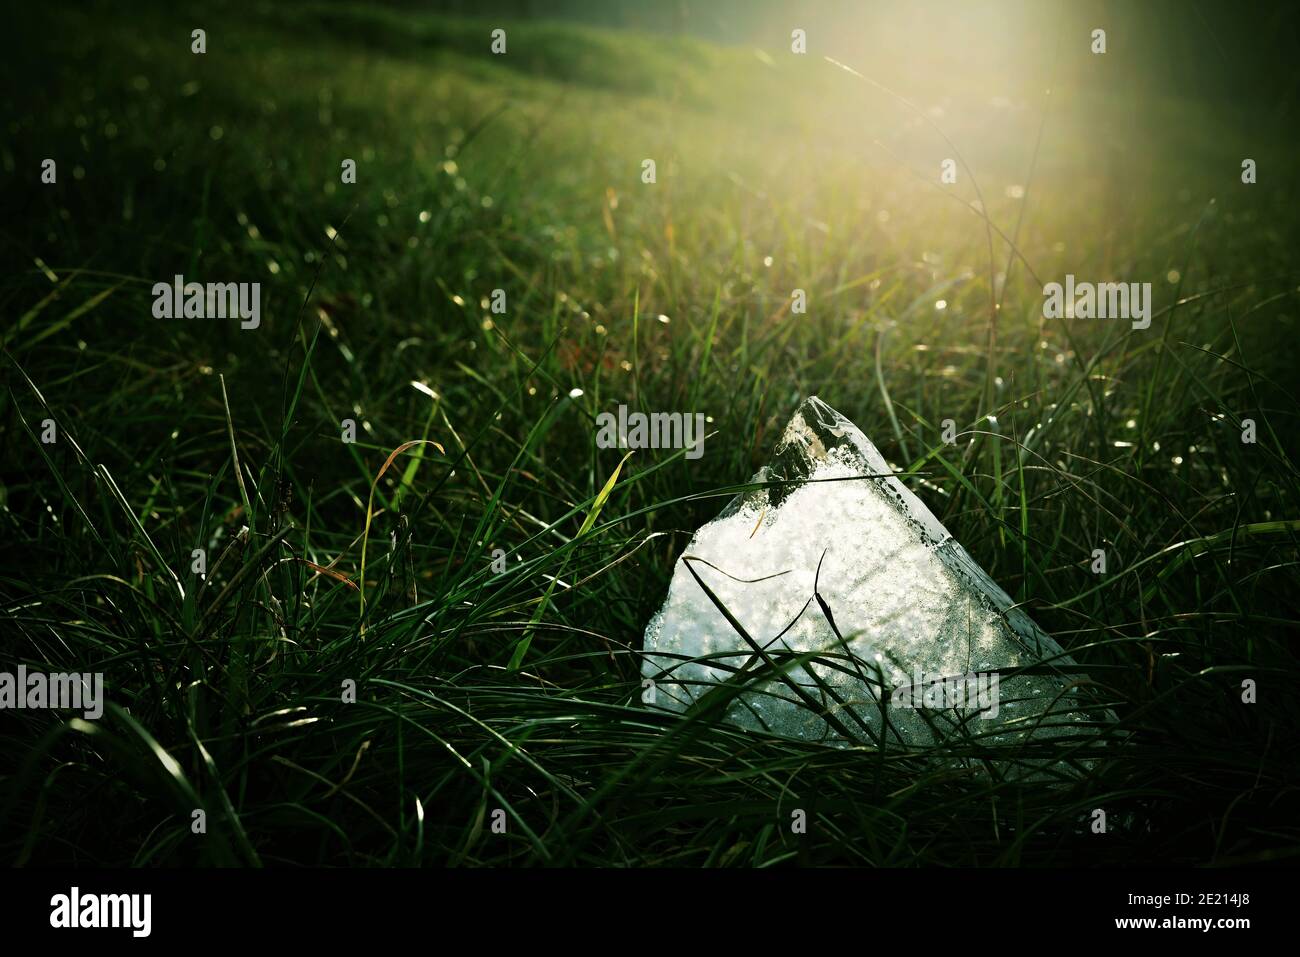 Romantic view of a piece of ice in the grass bathed in sunlight. Winter landscape with green grass, ice and sun in the background. Contrast between ic Stock Photo